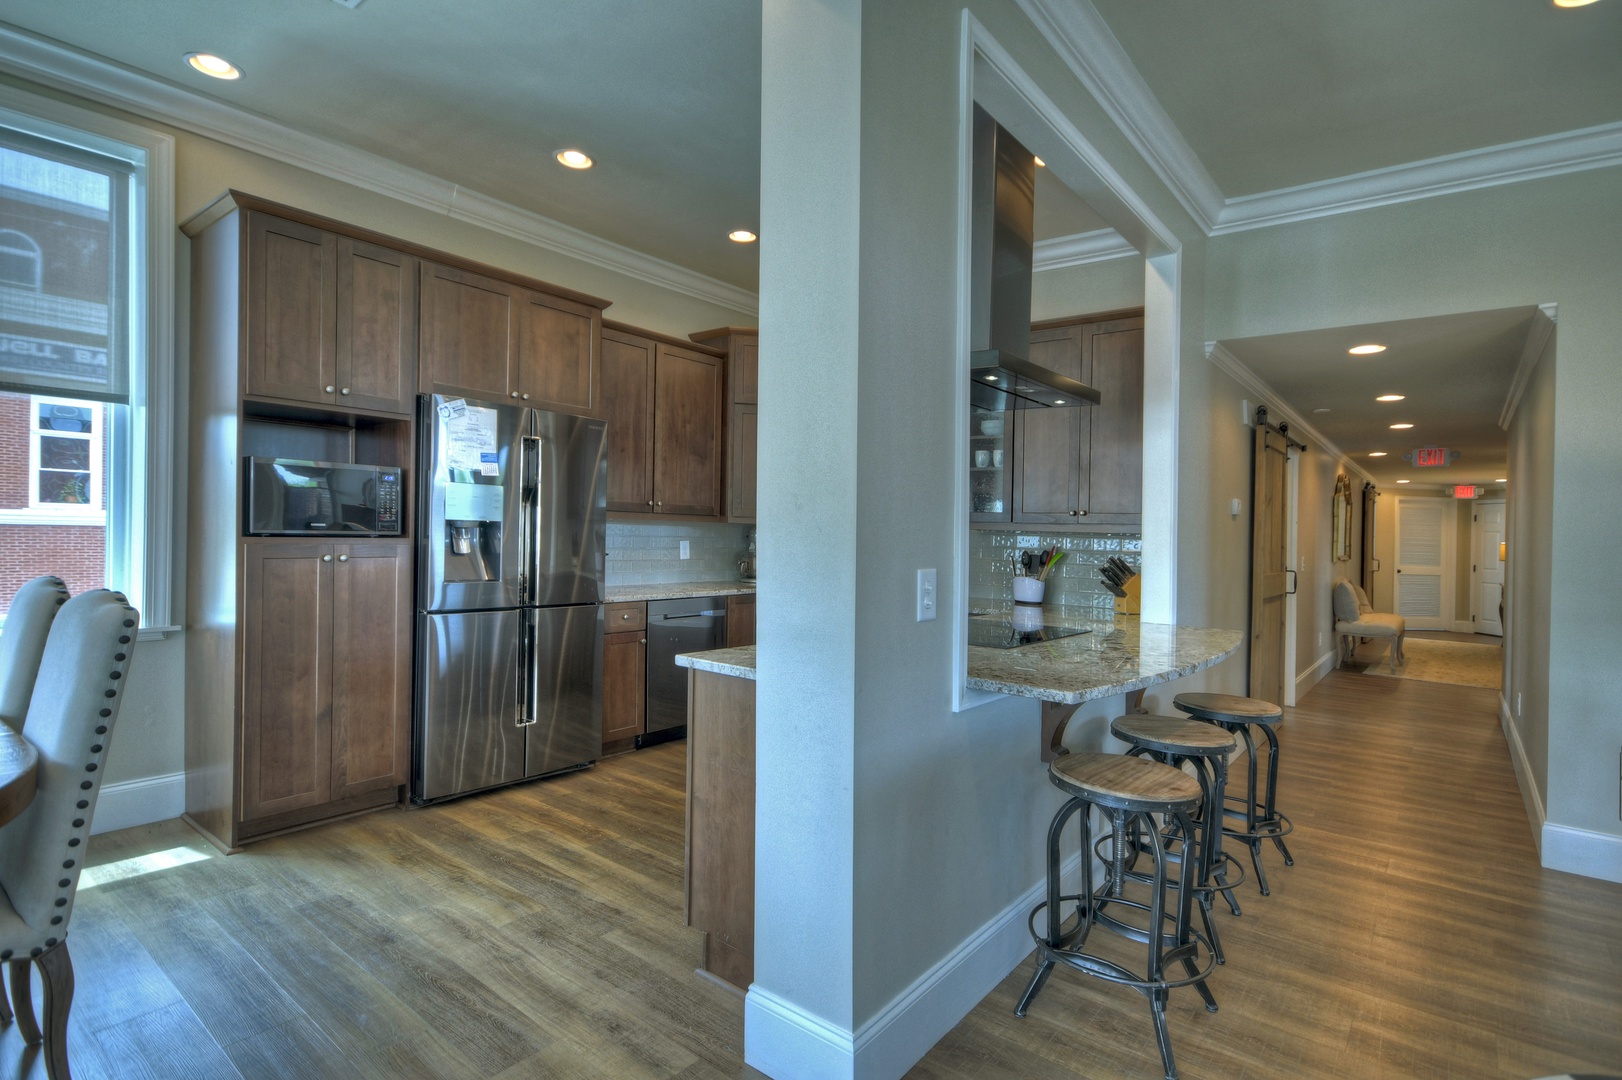 Main & Main- Fully equipped kitchen area